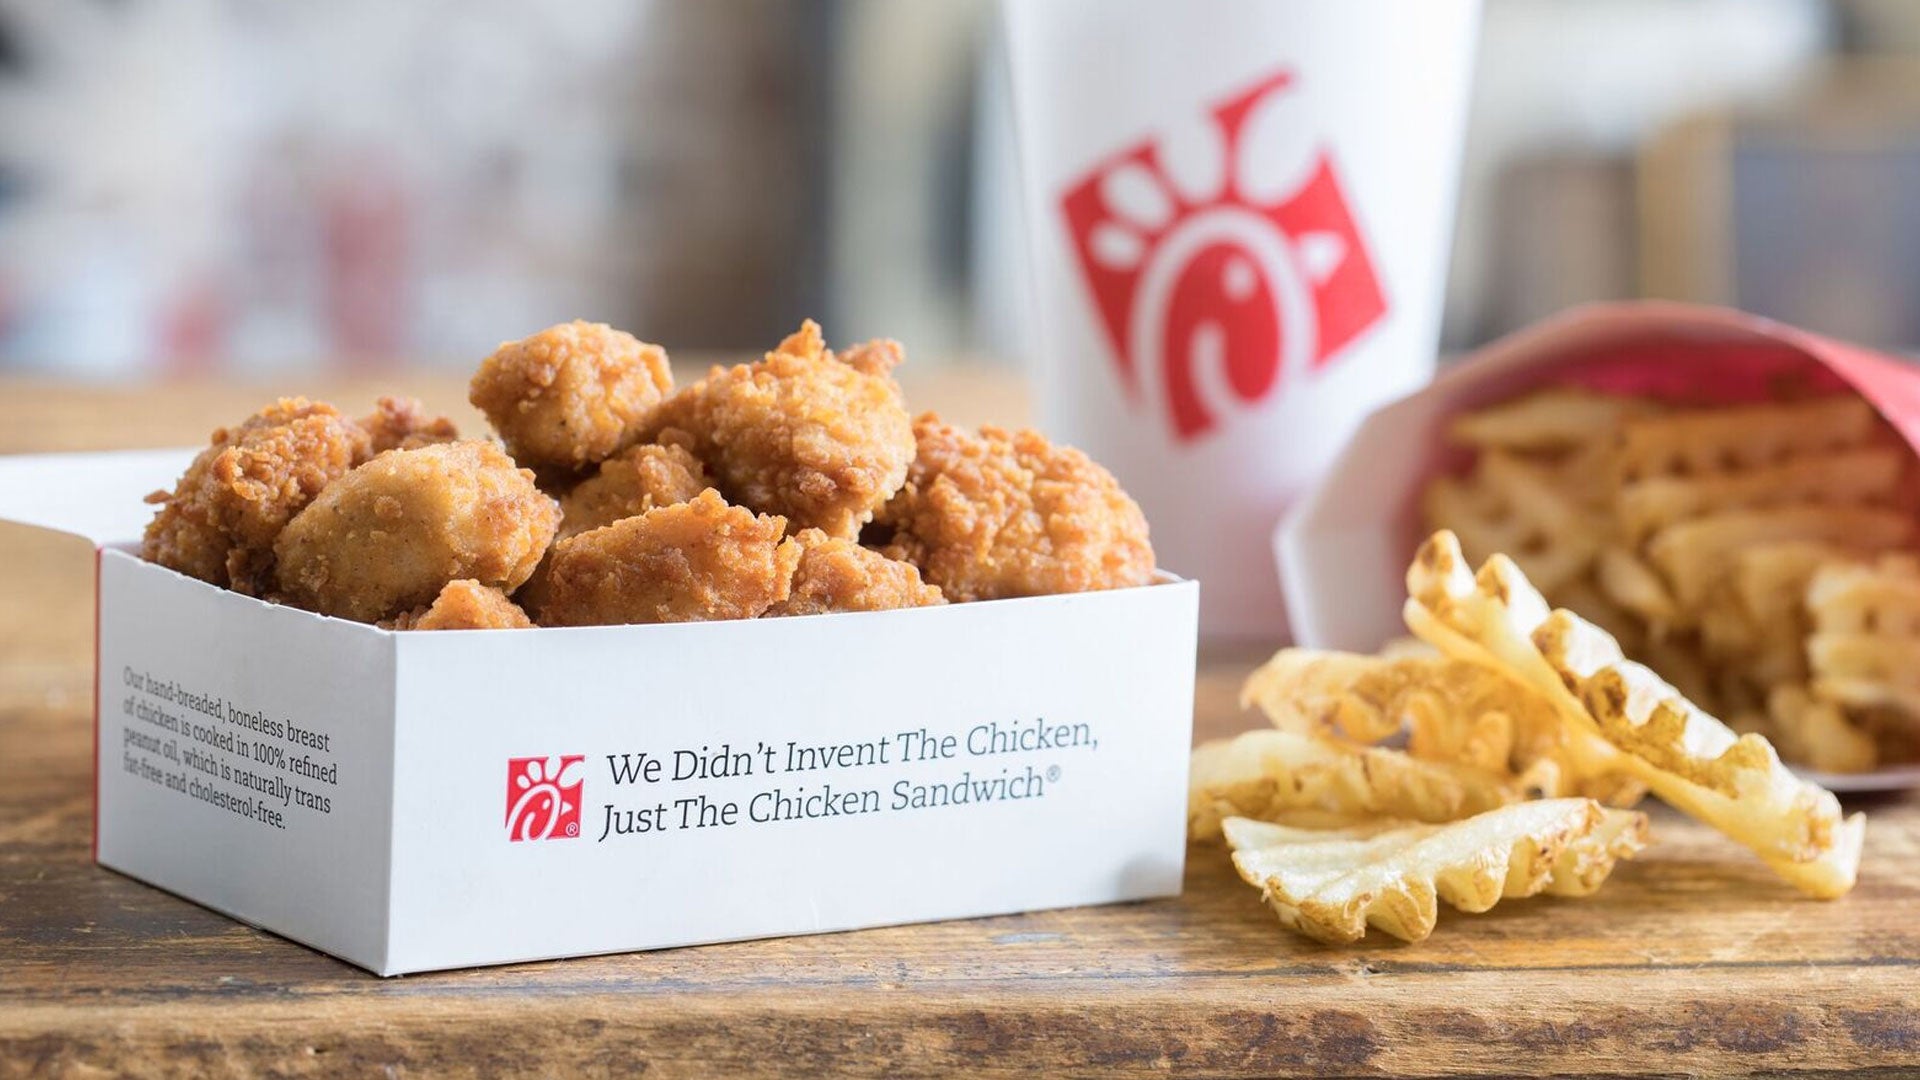 Chick-fil-A Releases Free Digital Cookbook, Puts a Spin on Classics to Reduce Food Waste